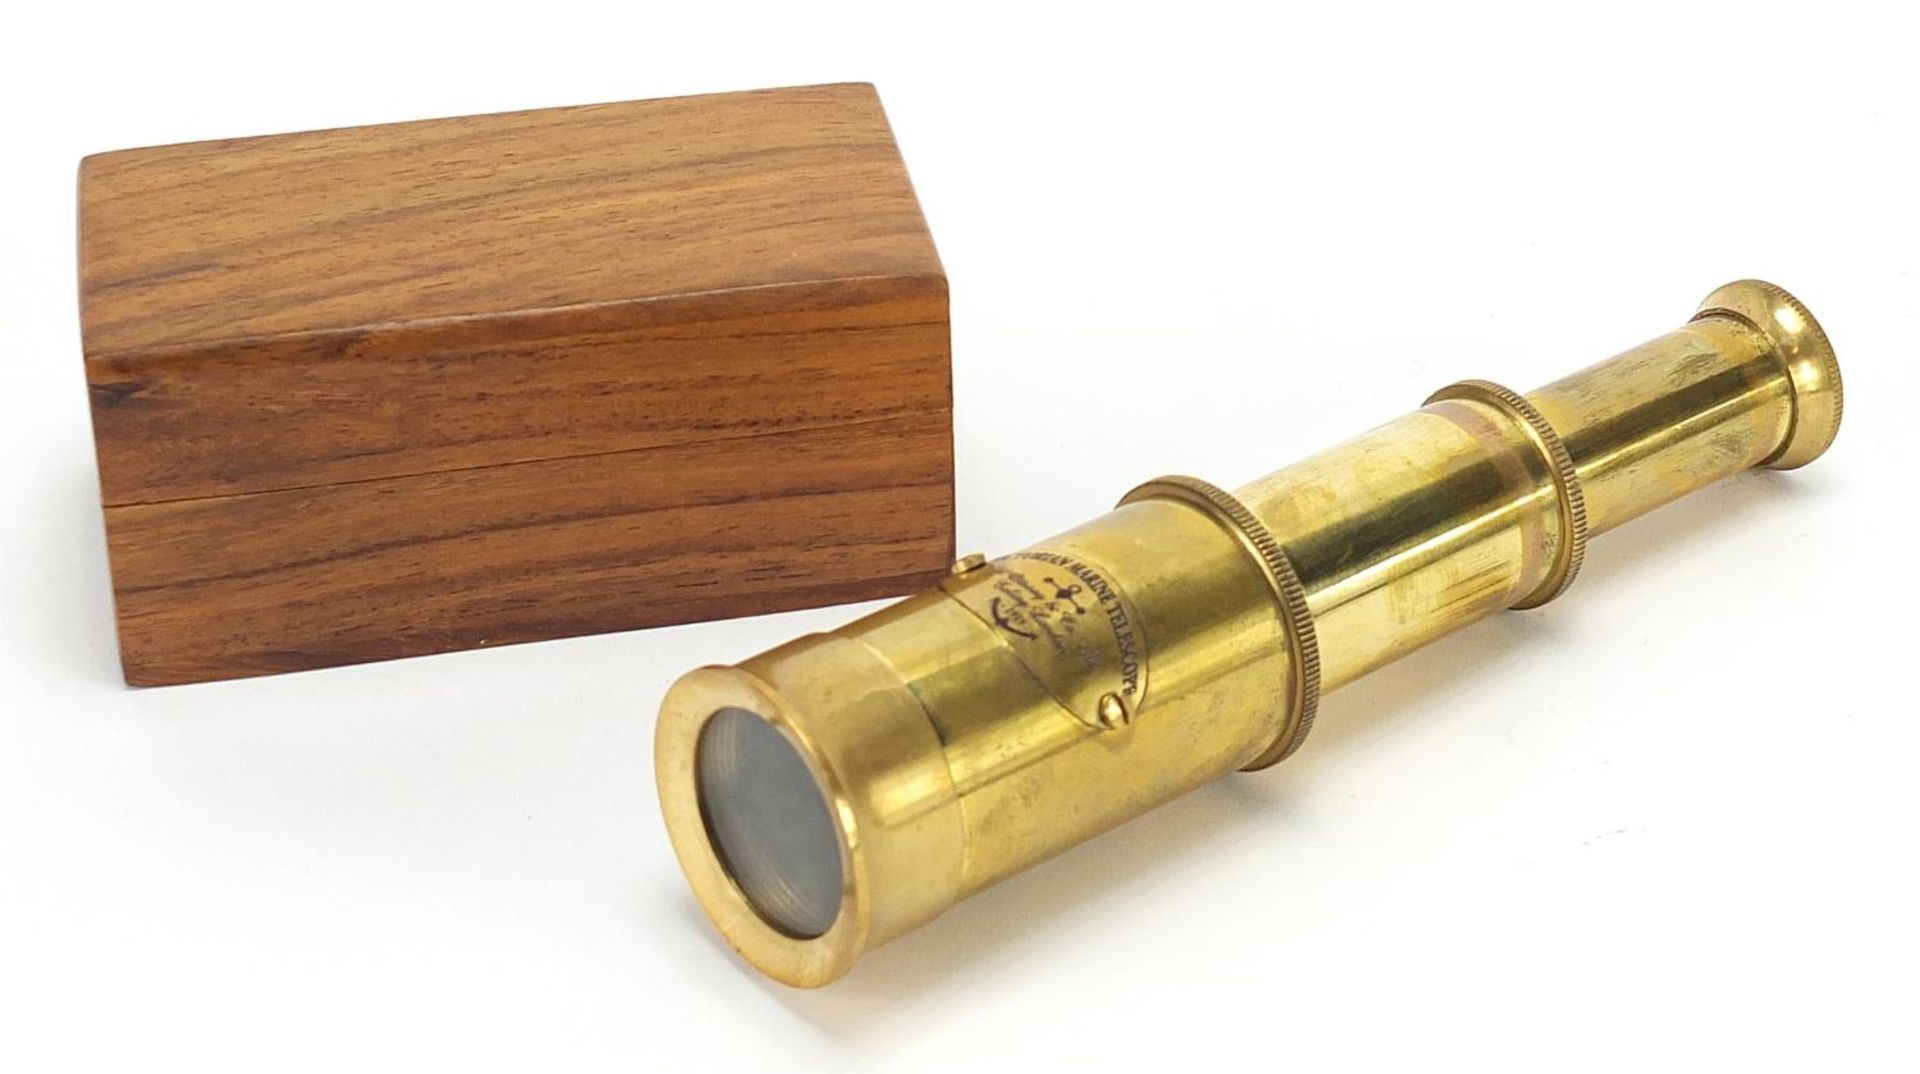 Naval interest marine two draw brass telescope with hardwood case, 8cm in length when closed